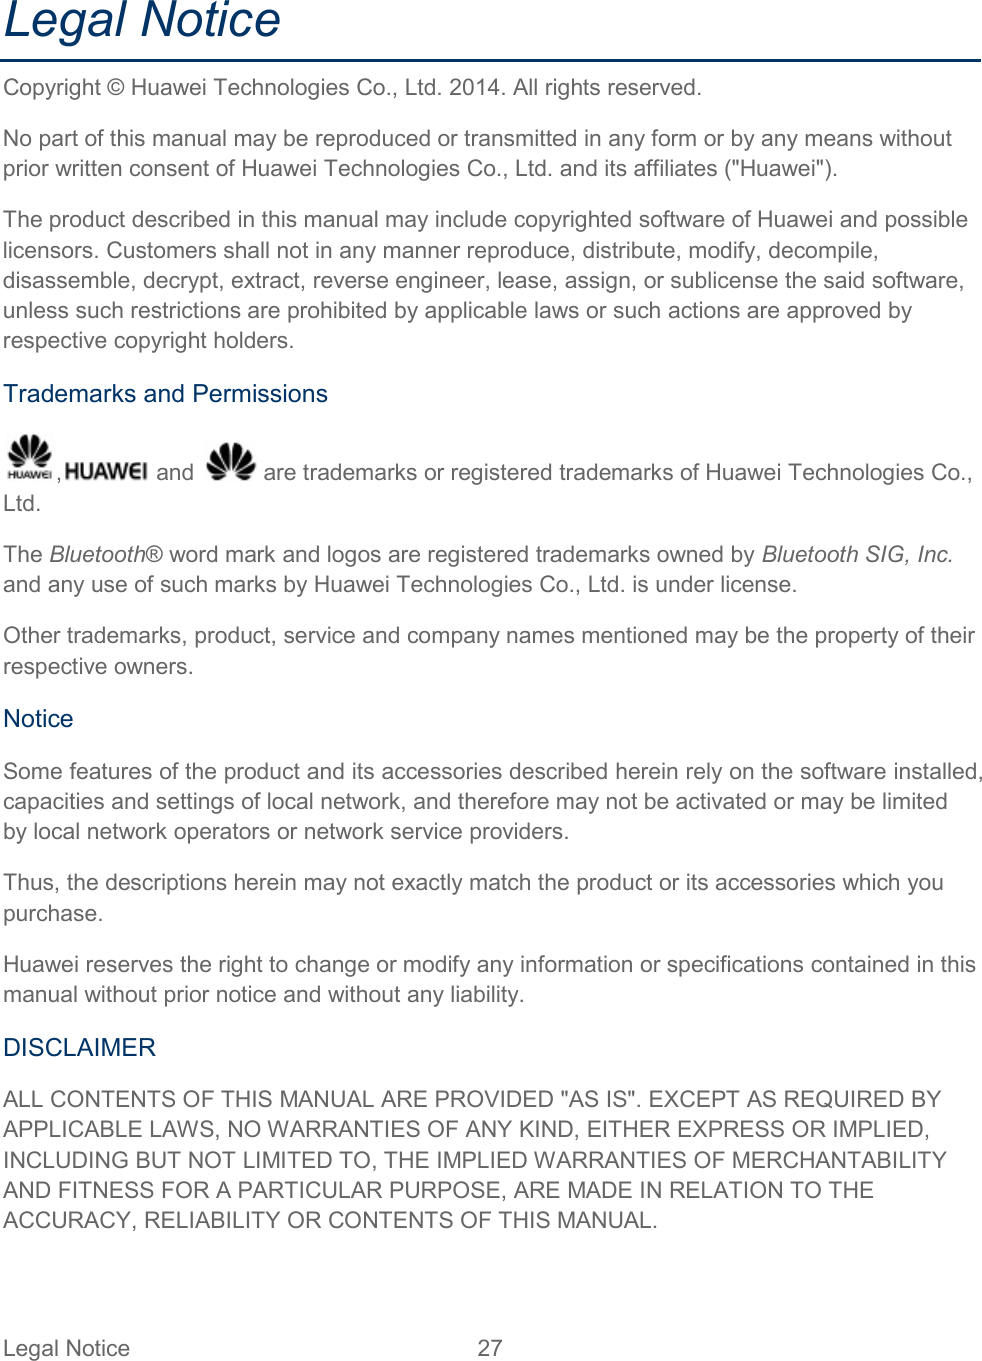 Legal Notice 27   Legal Notice Copyright © Huawei Technologies Co., Ltd. 2014. All rights reserved. No part of this manual may be reproduced or transmitted in any form or by any means without prior written consent of Huawei Technologies Co., Ltd. and its affiliates (&quot;Huawei&quot;). The product described in this manual may include copyrighted software of Huawei and possible licensors. Customers shall not in any manner reproduce, distribute, modify, decompile, disassemble, decrypt, extract, reverse engineer, lease, assign, or sublicense the said software, unless such restrictions are prohibited by applicable laws or such actions are approved by respective copyright holders. Trademarks and Permissions ,  and   are trademarks or registered trademarks of Huawei Technologies Co., Ltd. The Bluetooth® word mark and logos are registered trademarks owned by Bluetooth SIG, Inc. and any use of such marks by Huawei Technologies Co., Ltd. is under license. Other trademarks, product, service and company names mentioned may be the property of their respective owners. Notice Some features of the product and its accessories described herein rely on the software installed, capacities and settings of local network, and therefore may not be activated or may be limited by local network operators or network service providers. Thus, the descriptions herein may not exactly match the product or its accessories which you purchase. Huawei reserves the right to change or modify any information or specifications contained in this manual without prior notice and without any liability. DISCLAIMER ALL CONTENTS OF THIS MANUAL ARE PROVIDED &quot;AS IS&quot;. EXCEPT AS REQUIRED BY APPLICABLE LAWS, NO WARRANTIES OF ANY KIND, EITHER EXPRESS OR IMPLIED, INCLUDING BUT NOT LIMITED TO, THE IMPLIED WARRANTIES OF MERCHANTABILITY AND FITNESS FOR A PARTICULAR PURPOSE, ARE MADE IN RELATION TO THE ACCURACY, RELIABILITY OR CONTENTS OF THIS MANUAL. 